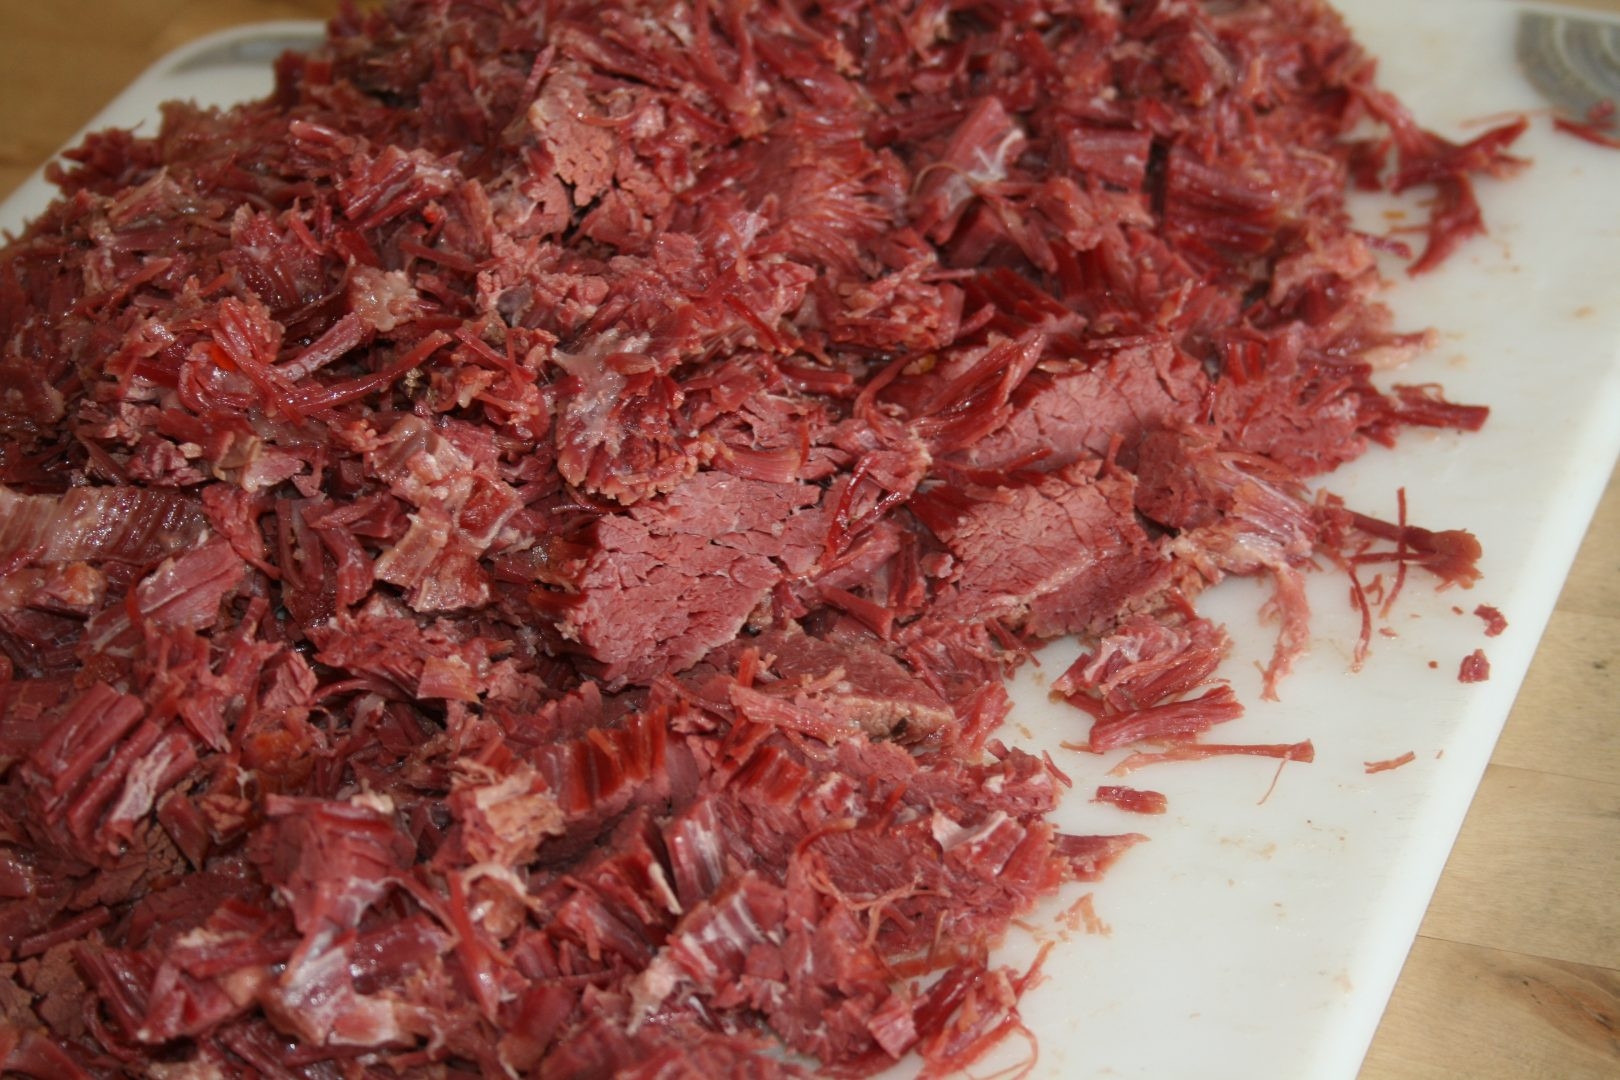 How To Make Corned Beef Brisket
 The Best Corned Beef Recipe You ll Find the Interweb